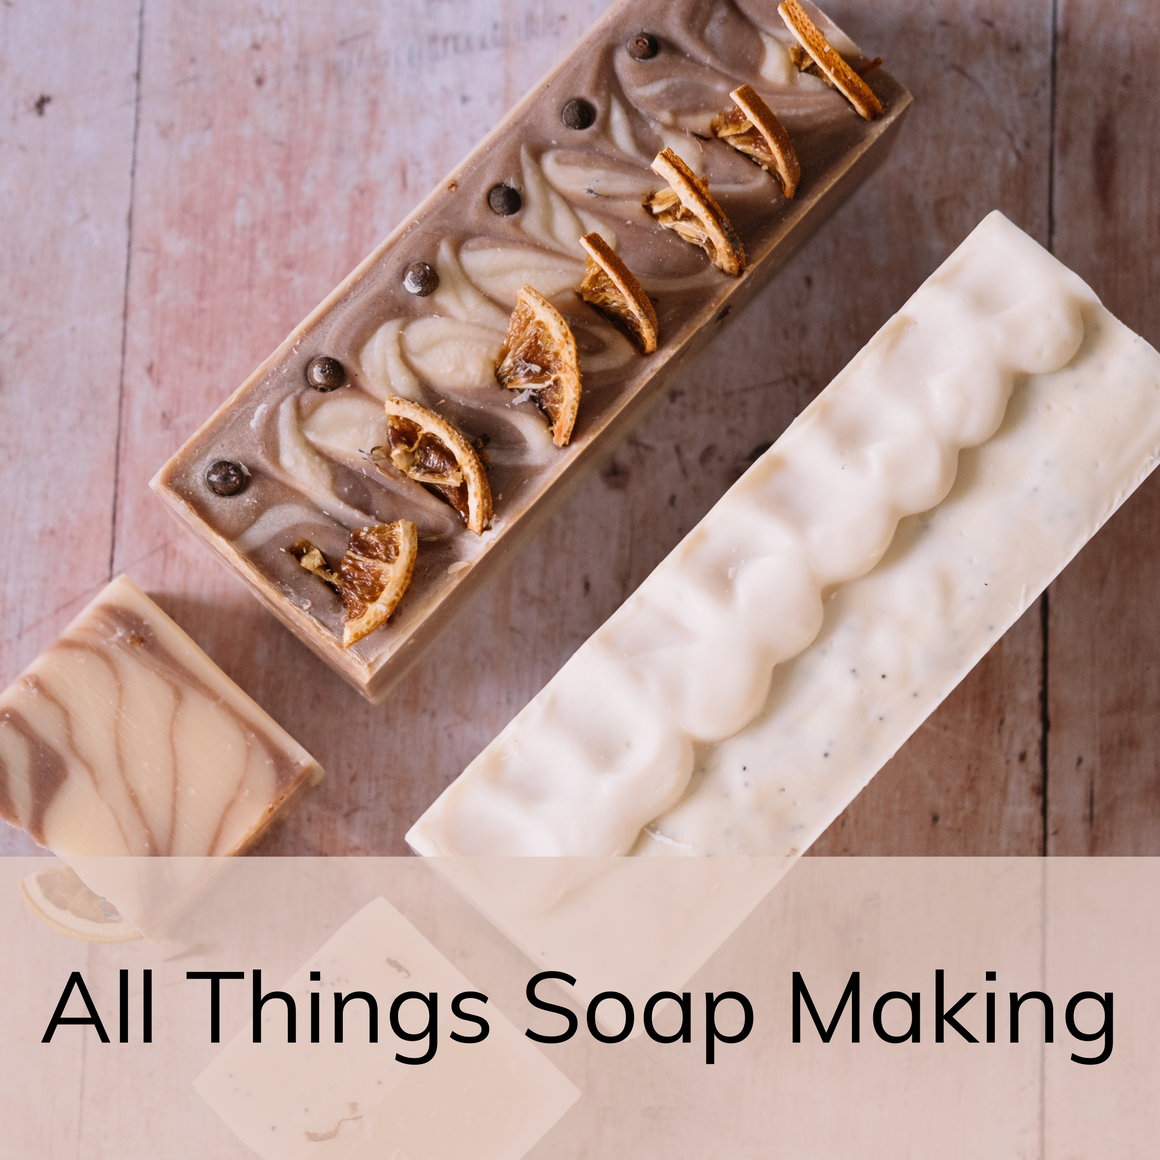 Where to buy soap making ingredients from in the UK - The Soap Coach